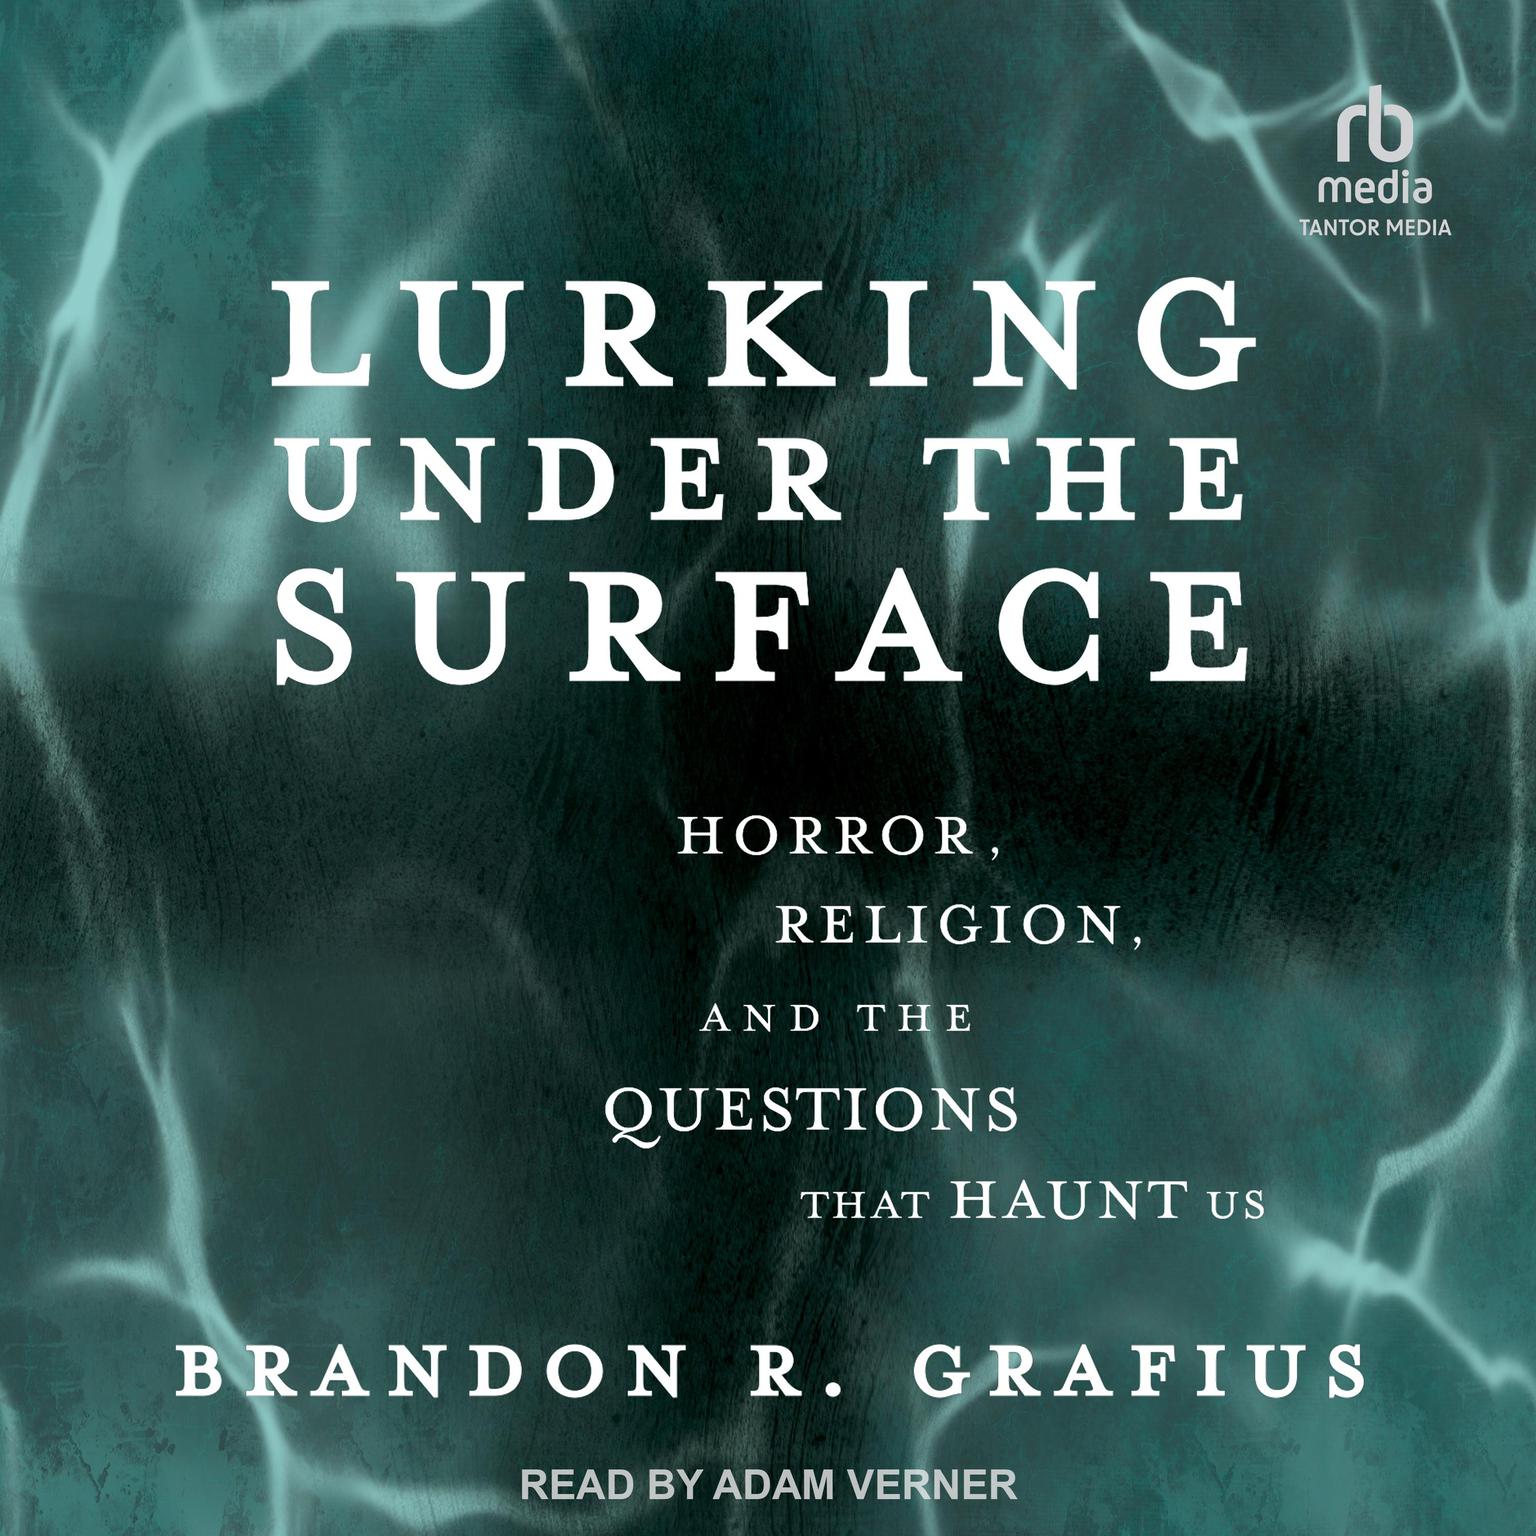 Lurking Under the Surface: Horror, Religion, and the Questions that Haunt Us Audiobook, by Brandon R. Grafius